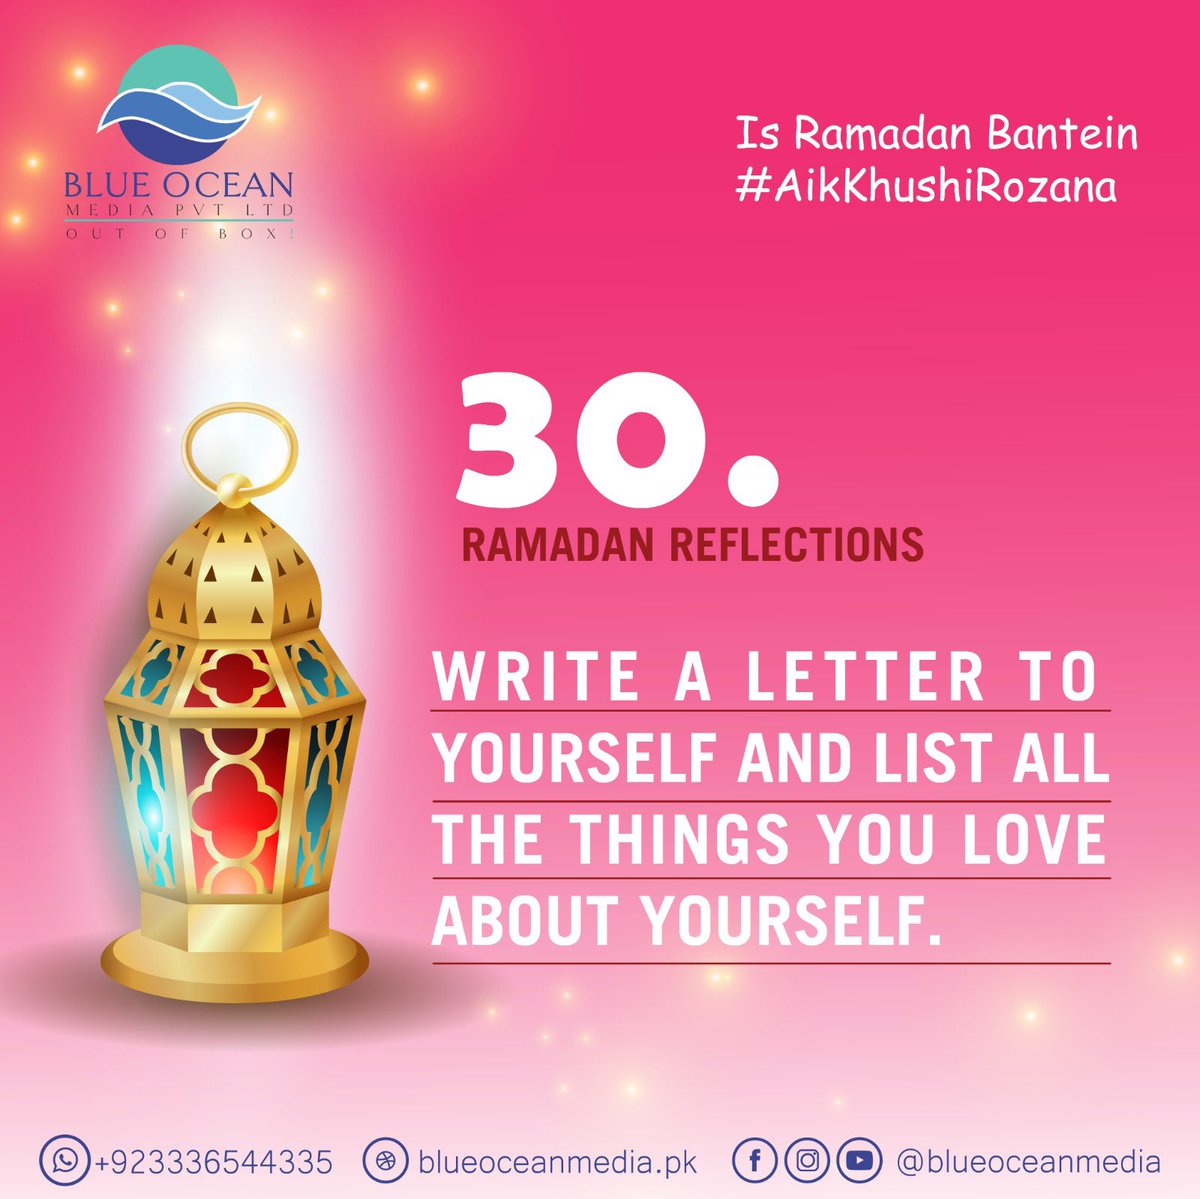 #IsRamadanBantein #AikKhushiRozana

Ramadan Relfections;
'WRITE A LETTER TO YOURSELF AND LIST ALL THE THINGS YOU LOVE ABOUT YOURSELF.'

#OutOfBox #blueoceanmedia #ramadan2023  #marketingcampaigns #peoplefirstculture #campaigns #marketing #sales #digitalamarketing #eventmanagement